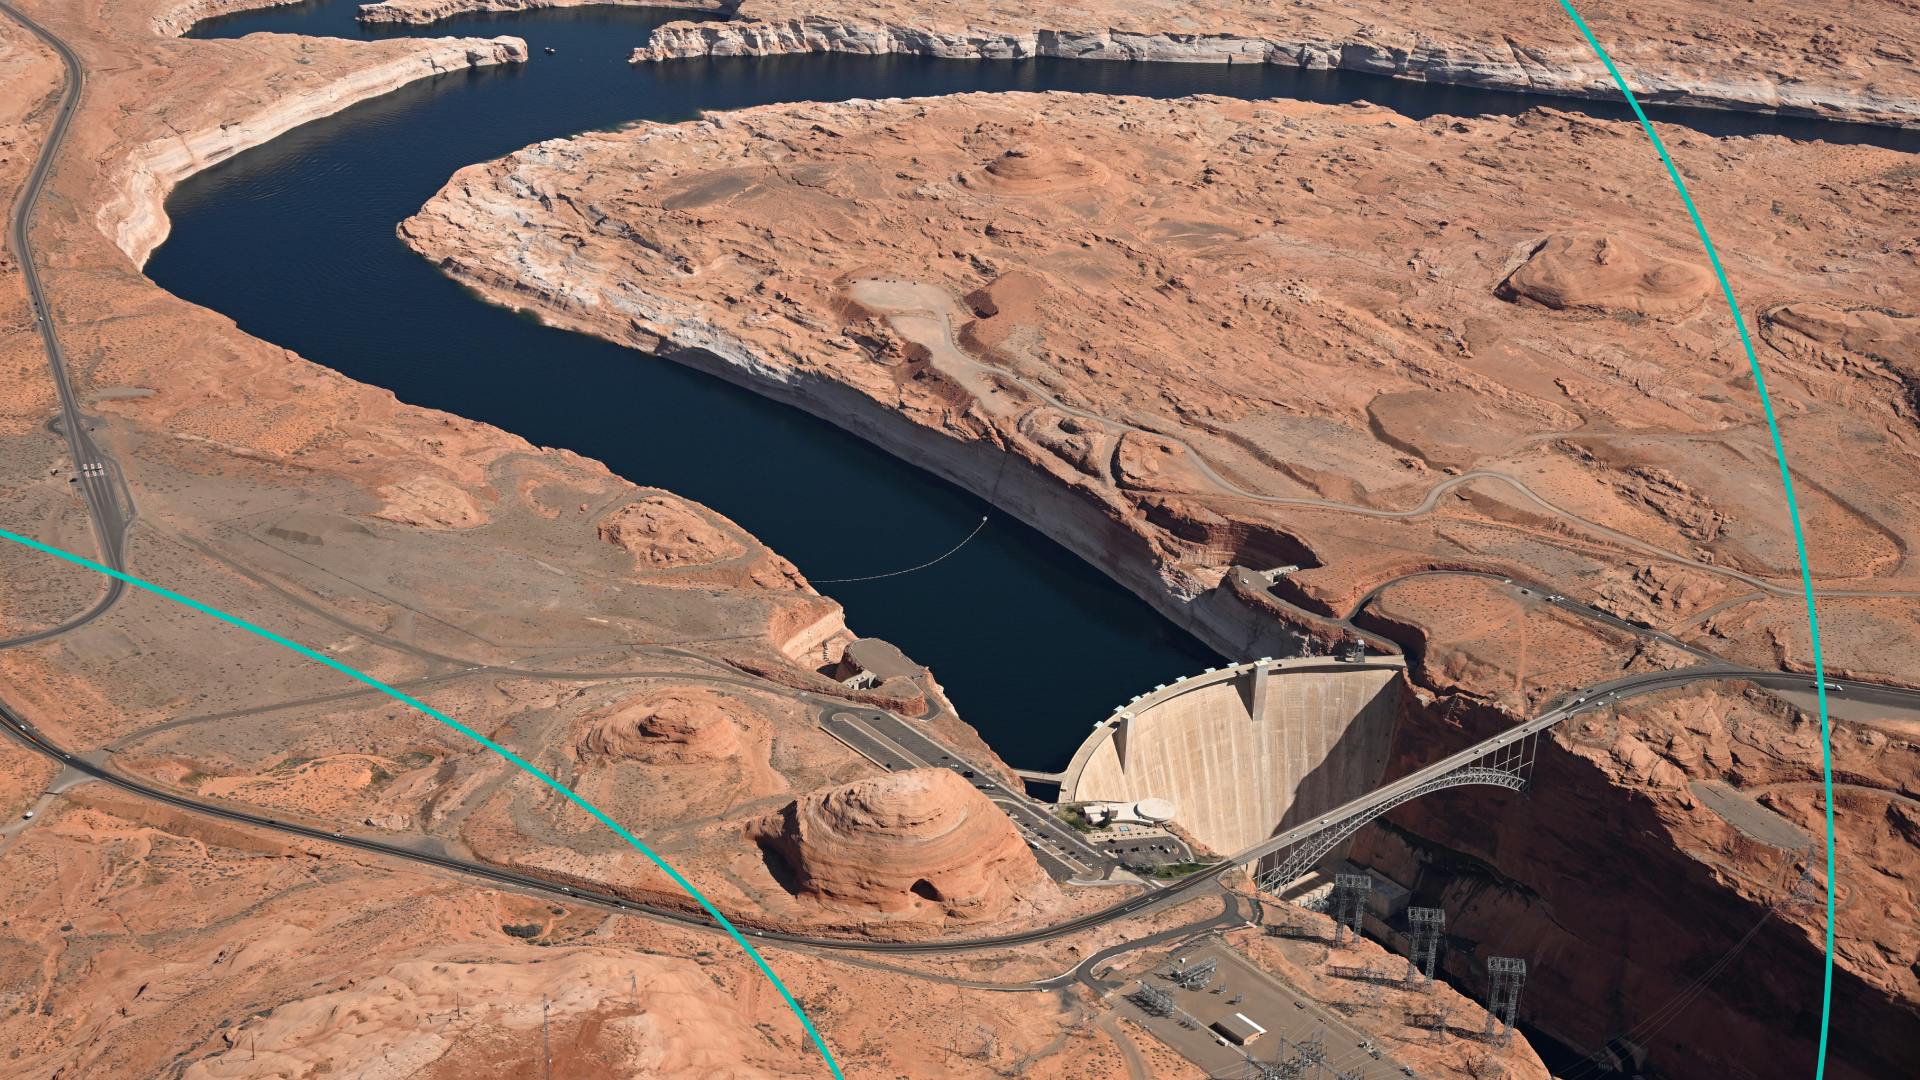 Glen Canyon Dam holds back Colorado River water to create Lake Powell